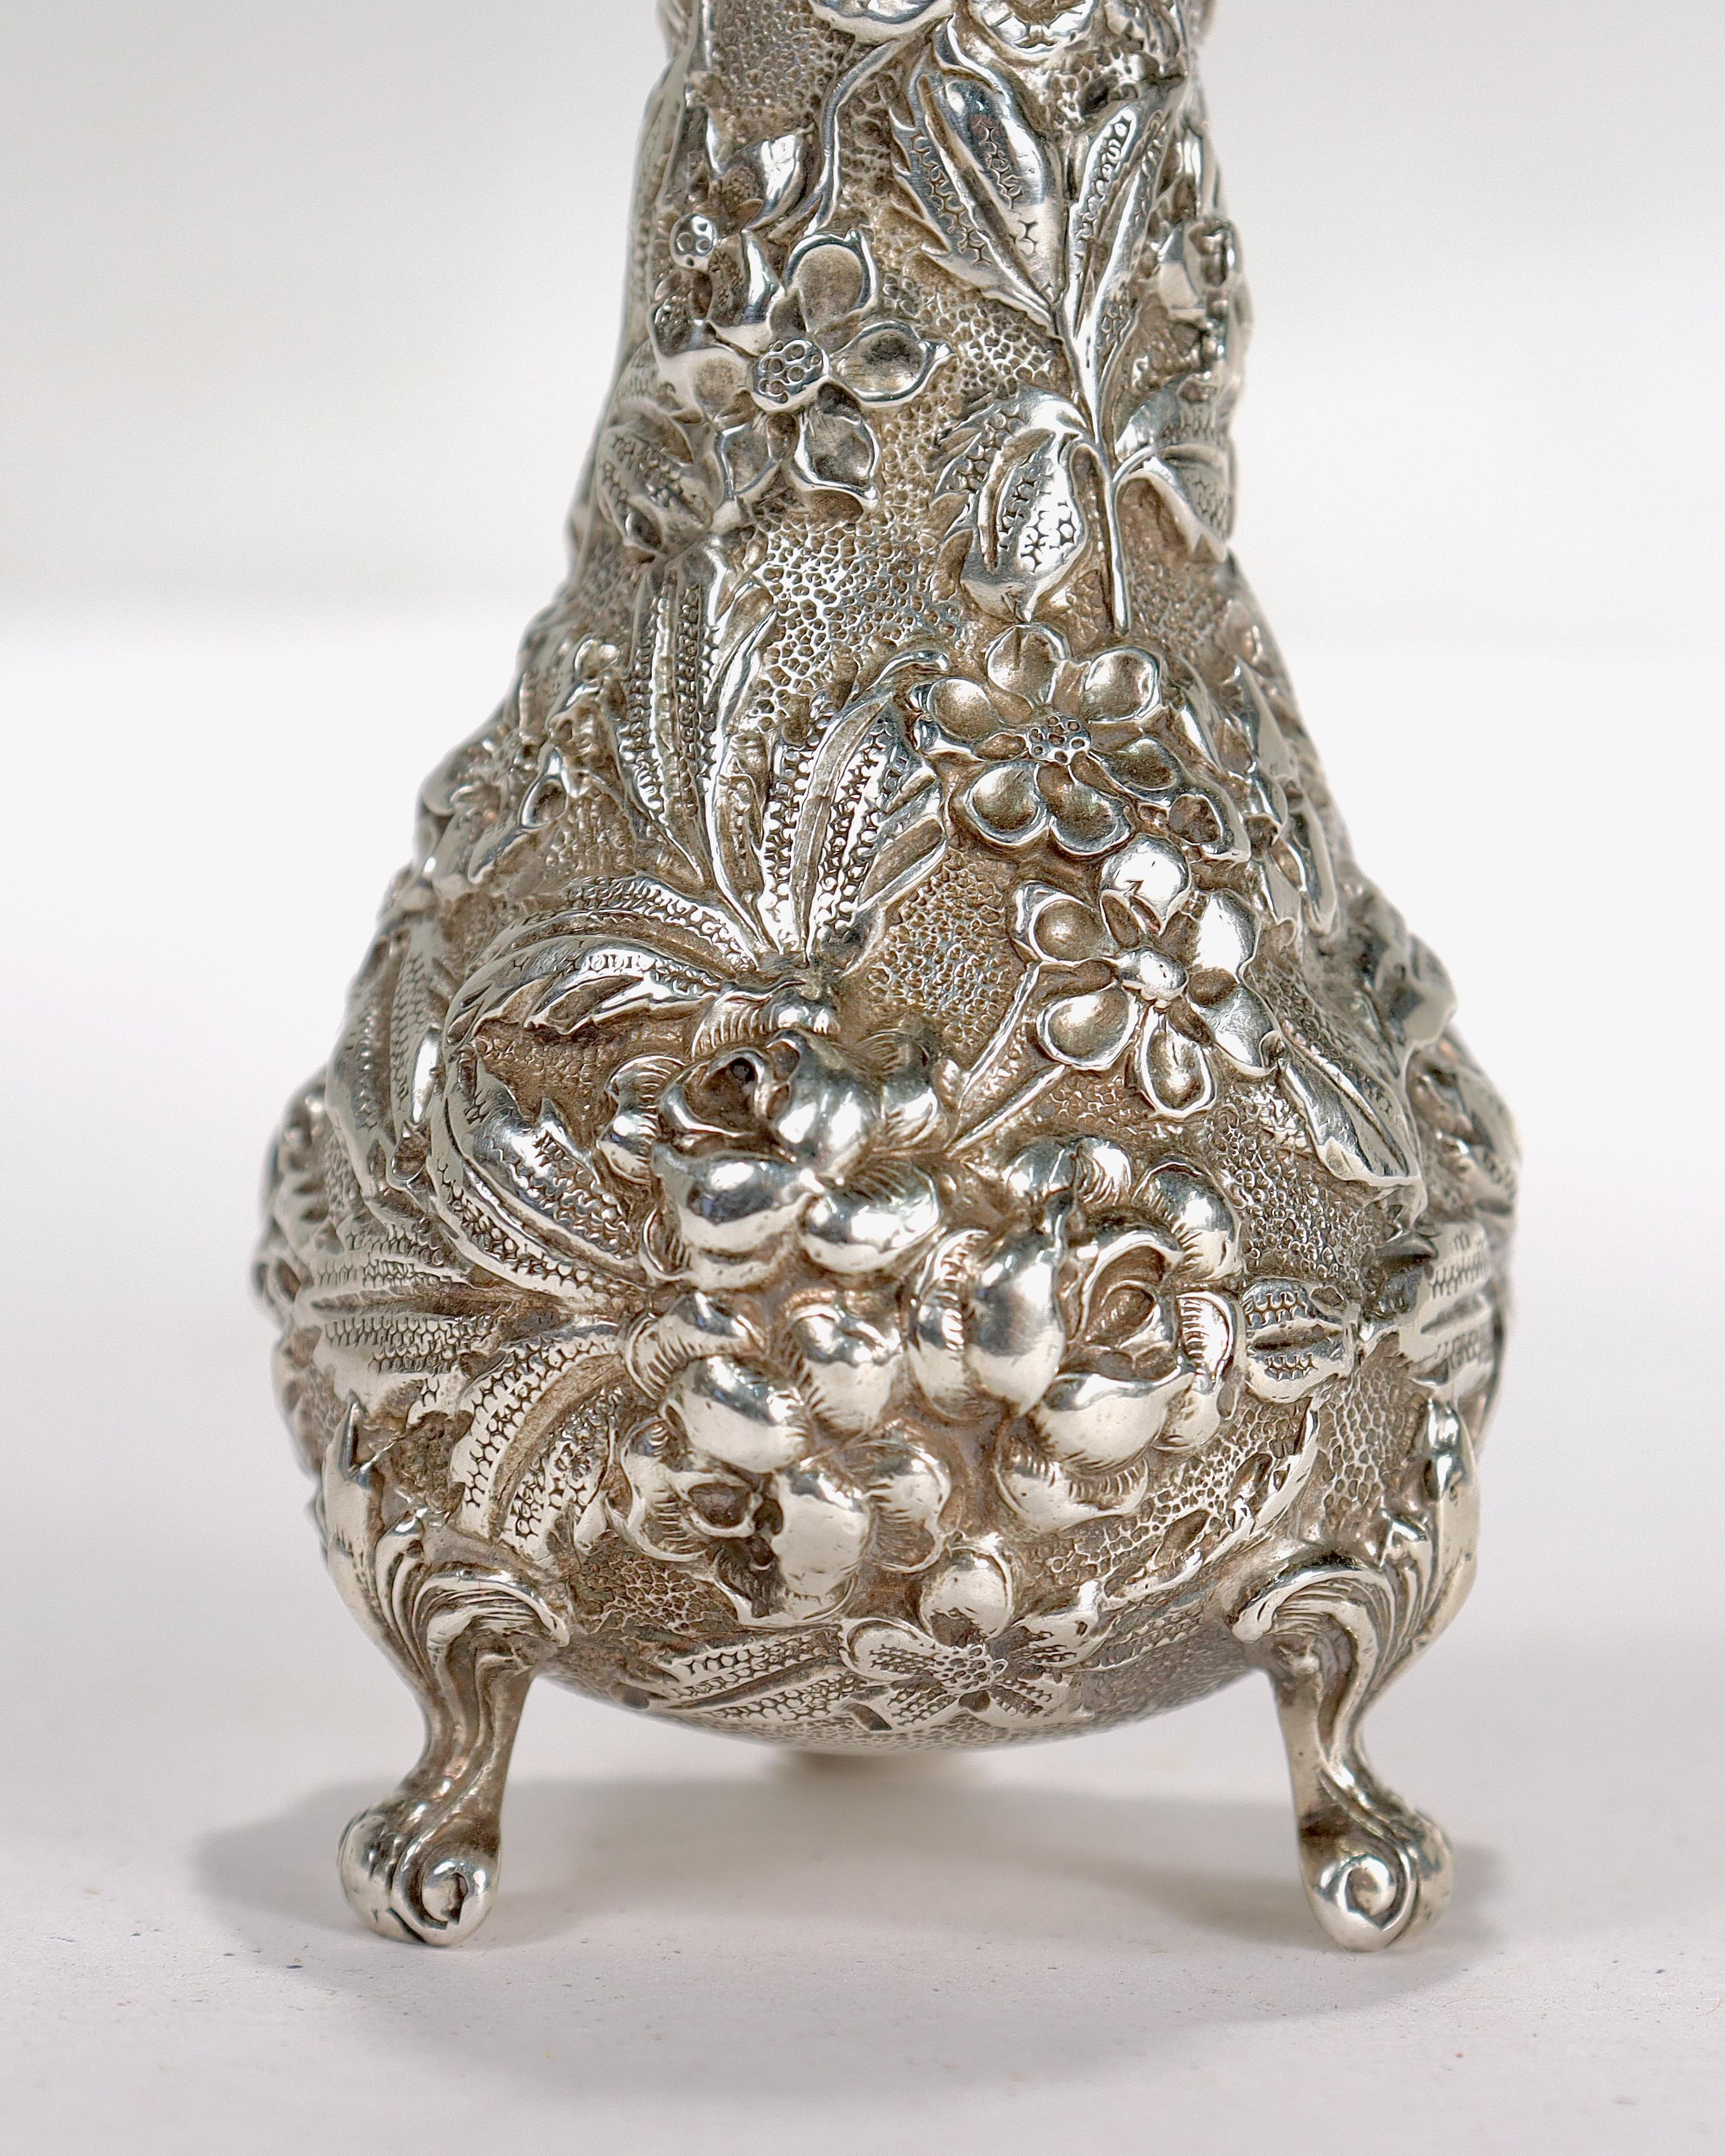 Antique Stieff Sterling Silver Repousse Salt Shaker For Sale 2